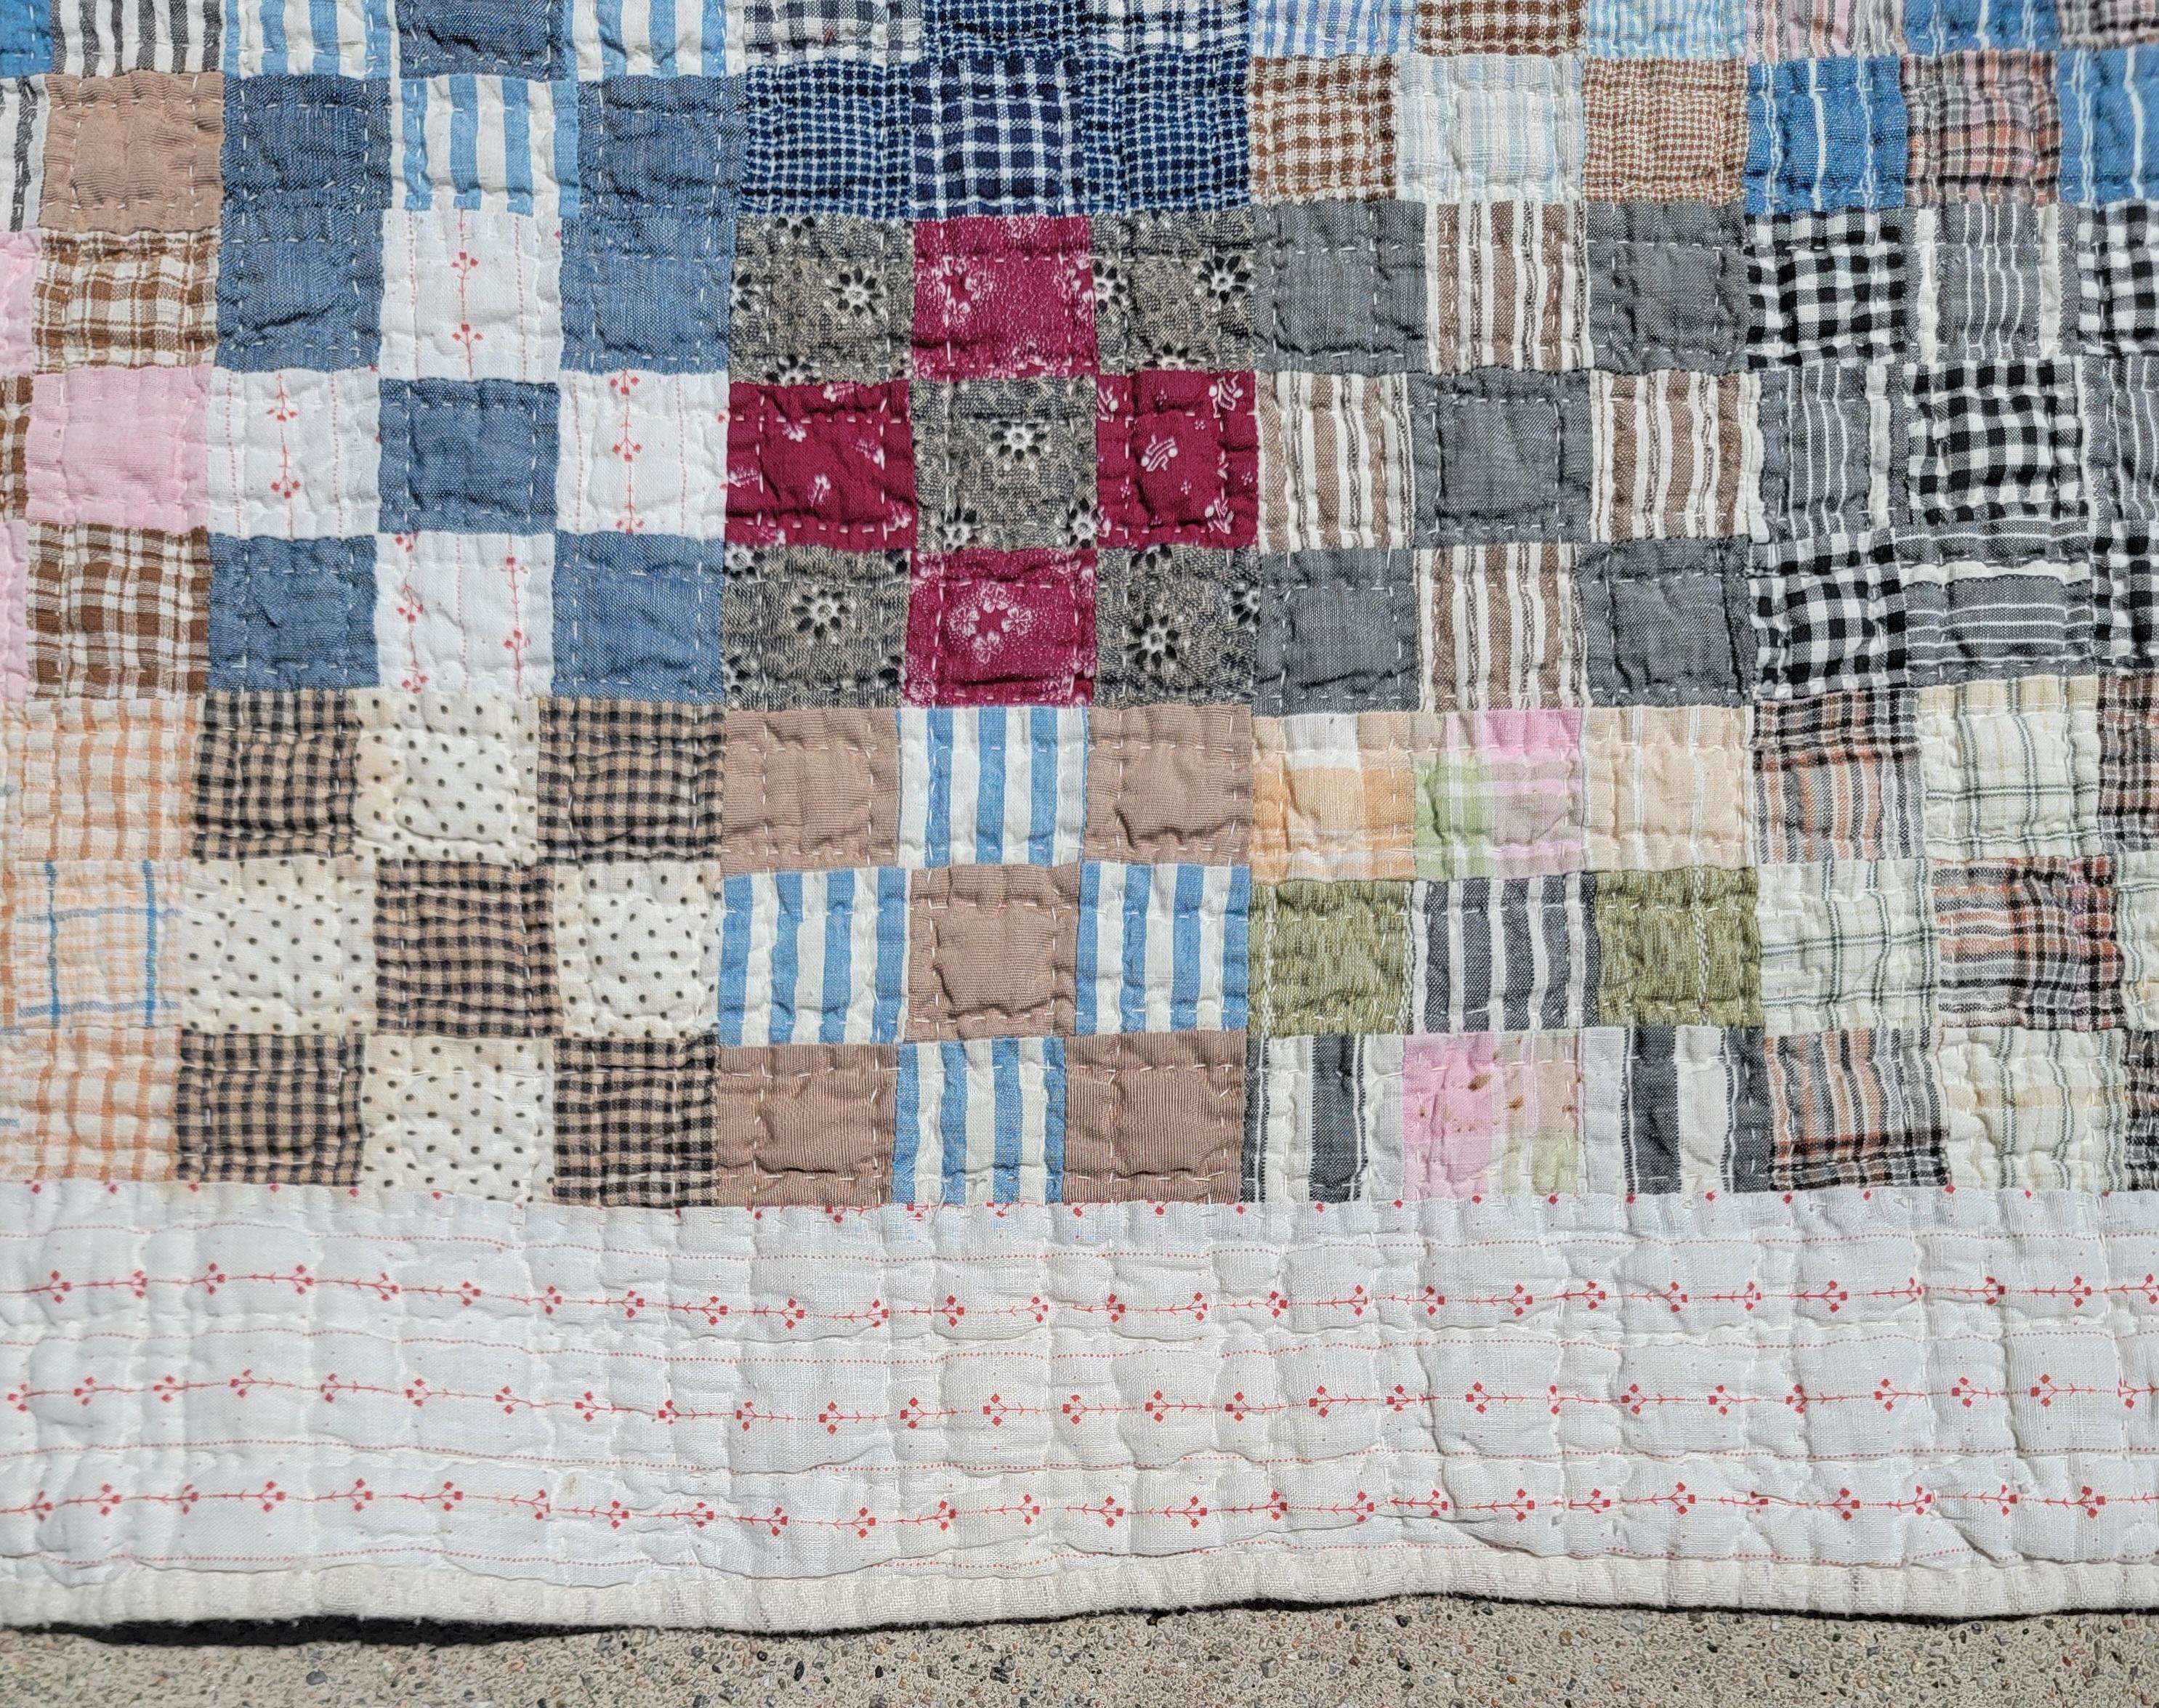 This fun country quilt is in good condition and is made up of wonderful country calico fabrics.